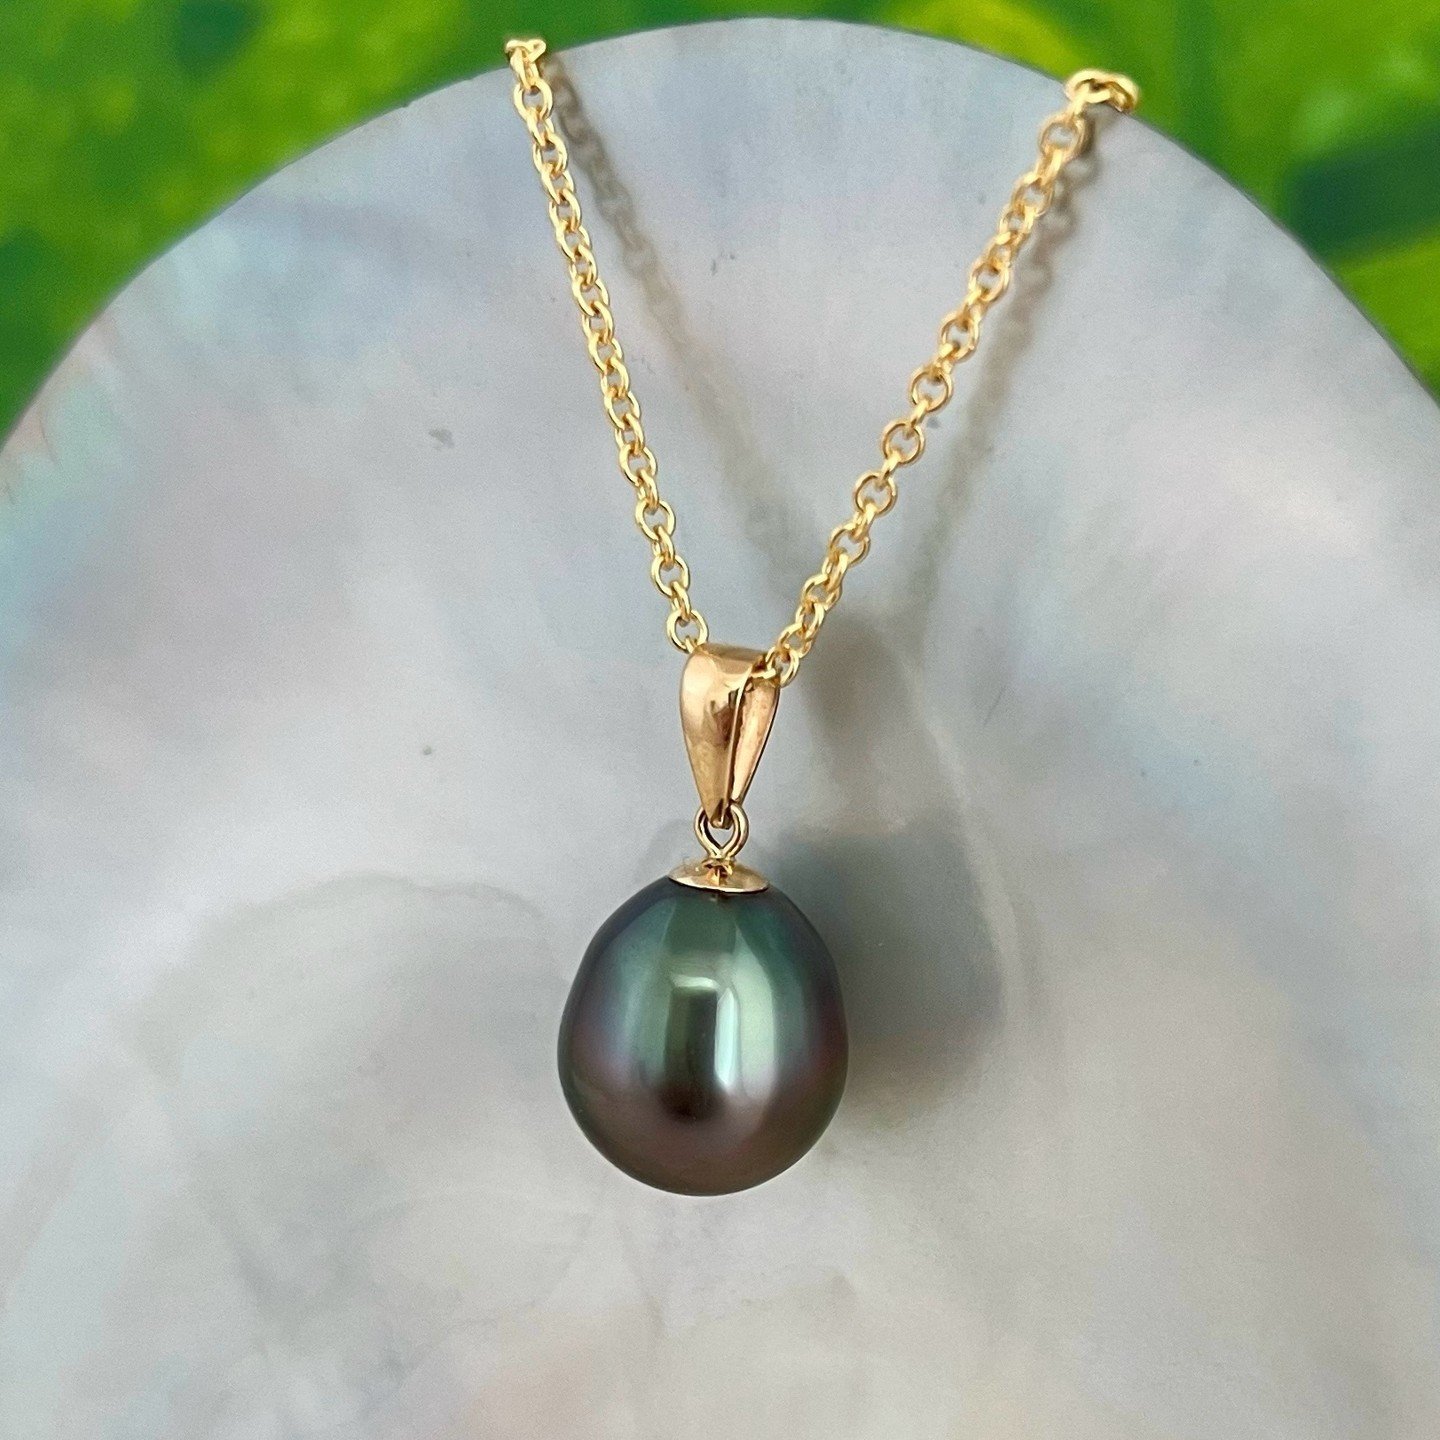 𝐀𝐮𝐛𝐞𝐫𝐠𝐢𝐧𝐞 💜

When mesmerizing hues of teal and purple beautifully blend together in just the right places to offer a unique pearl that will take your breath away with it's flawless quality.

&bull;One-and-Only, DM to purchase
or head over t